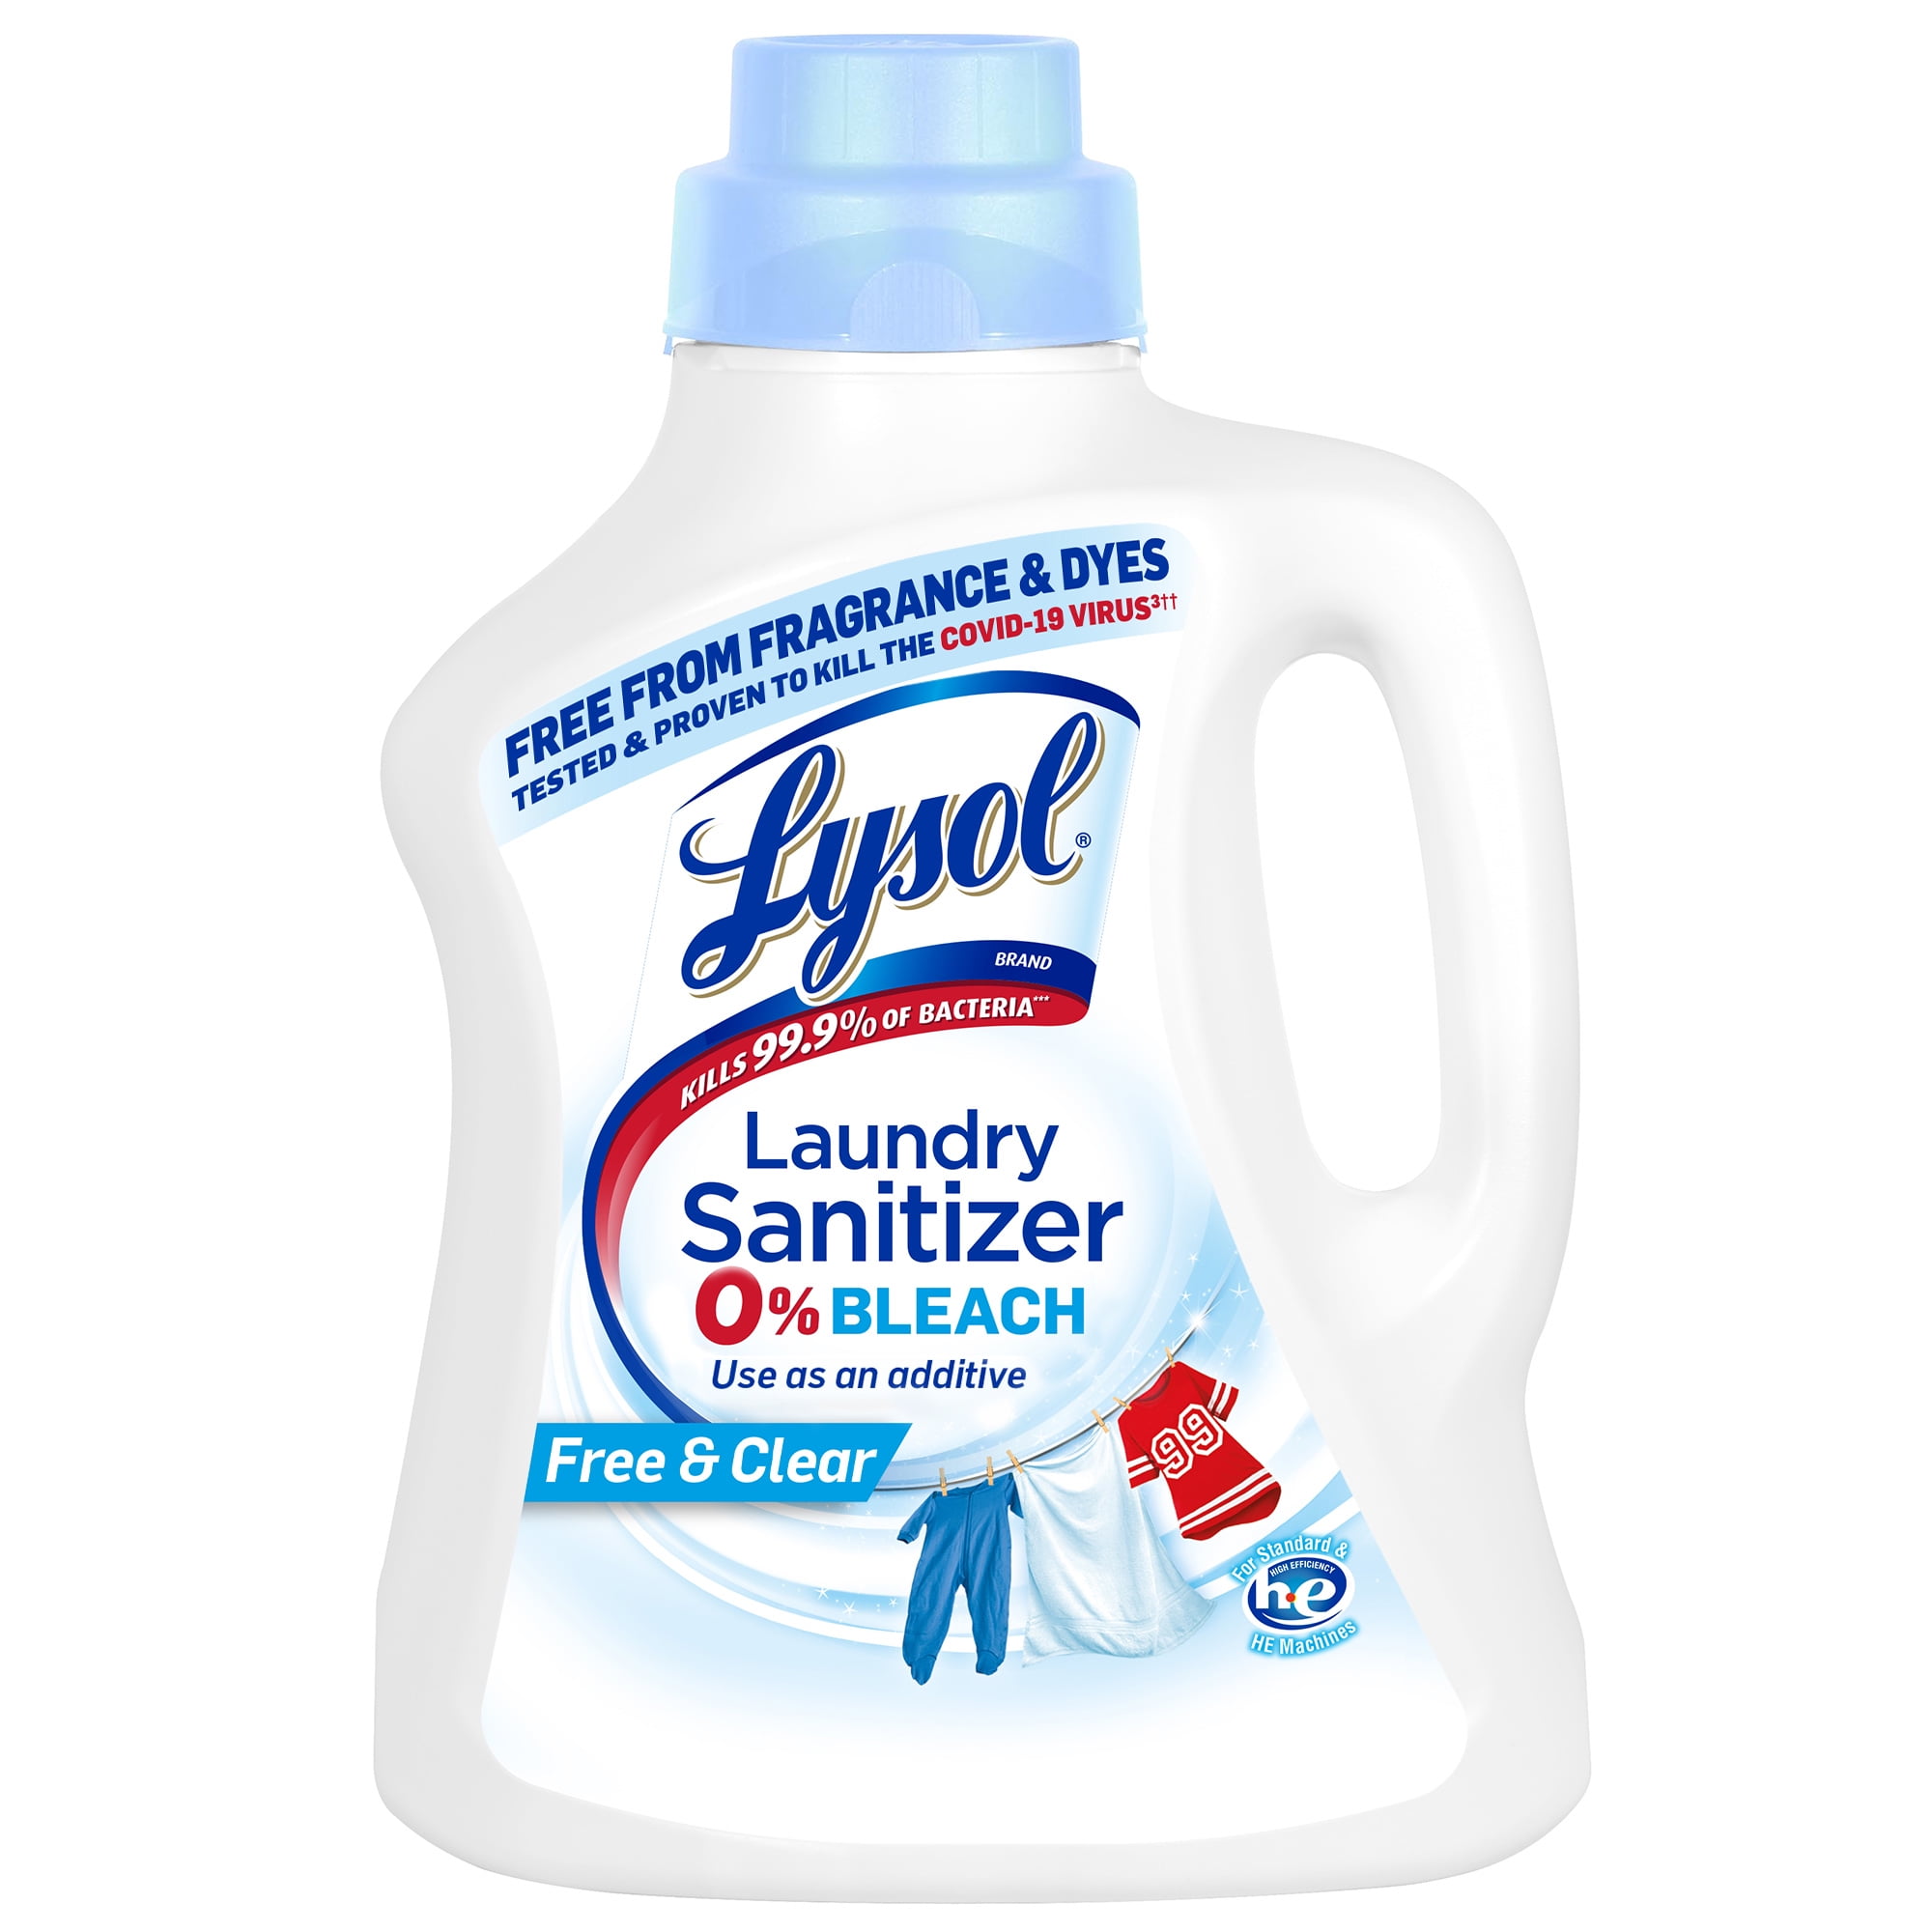 Lysol Laundry Sanitizer Additive, Sanitizing Liquid for Clothes and Linens, Eliminates Odor Causing Bacteria, Free from Fragrance & Dyes, 90oz